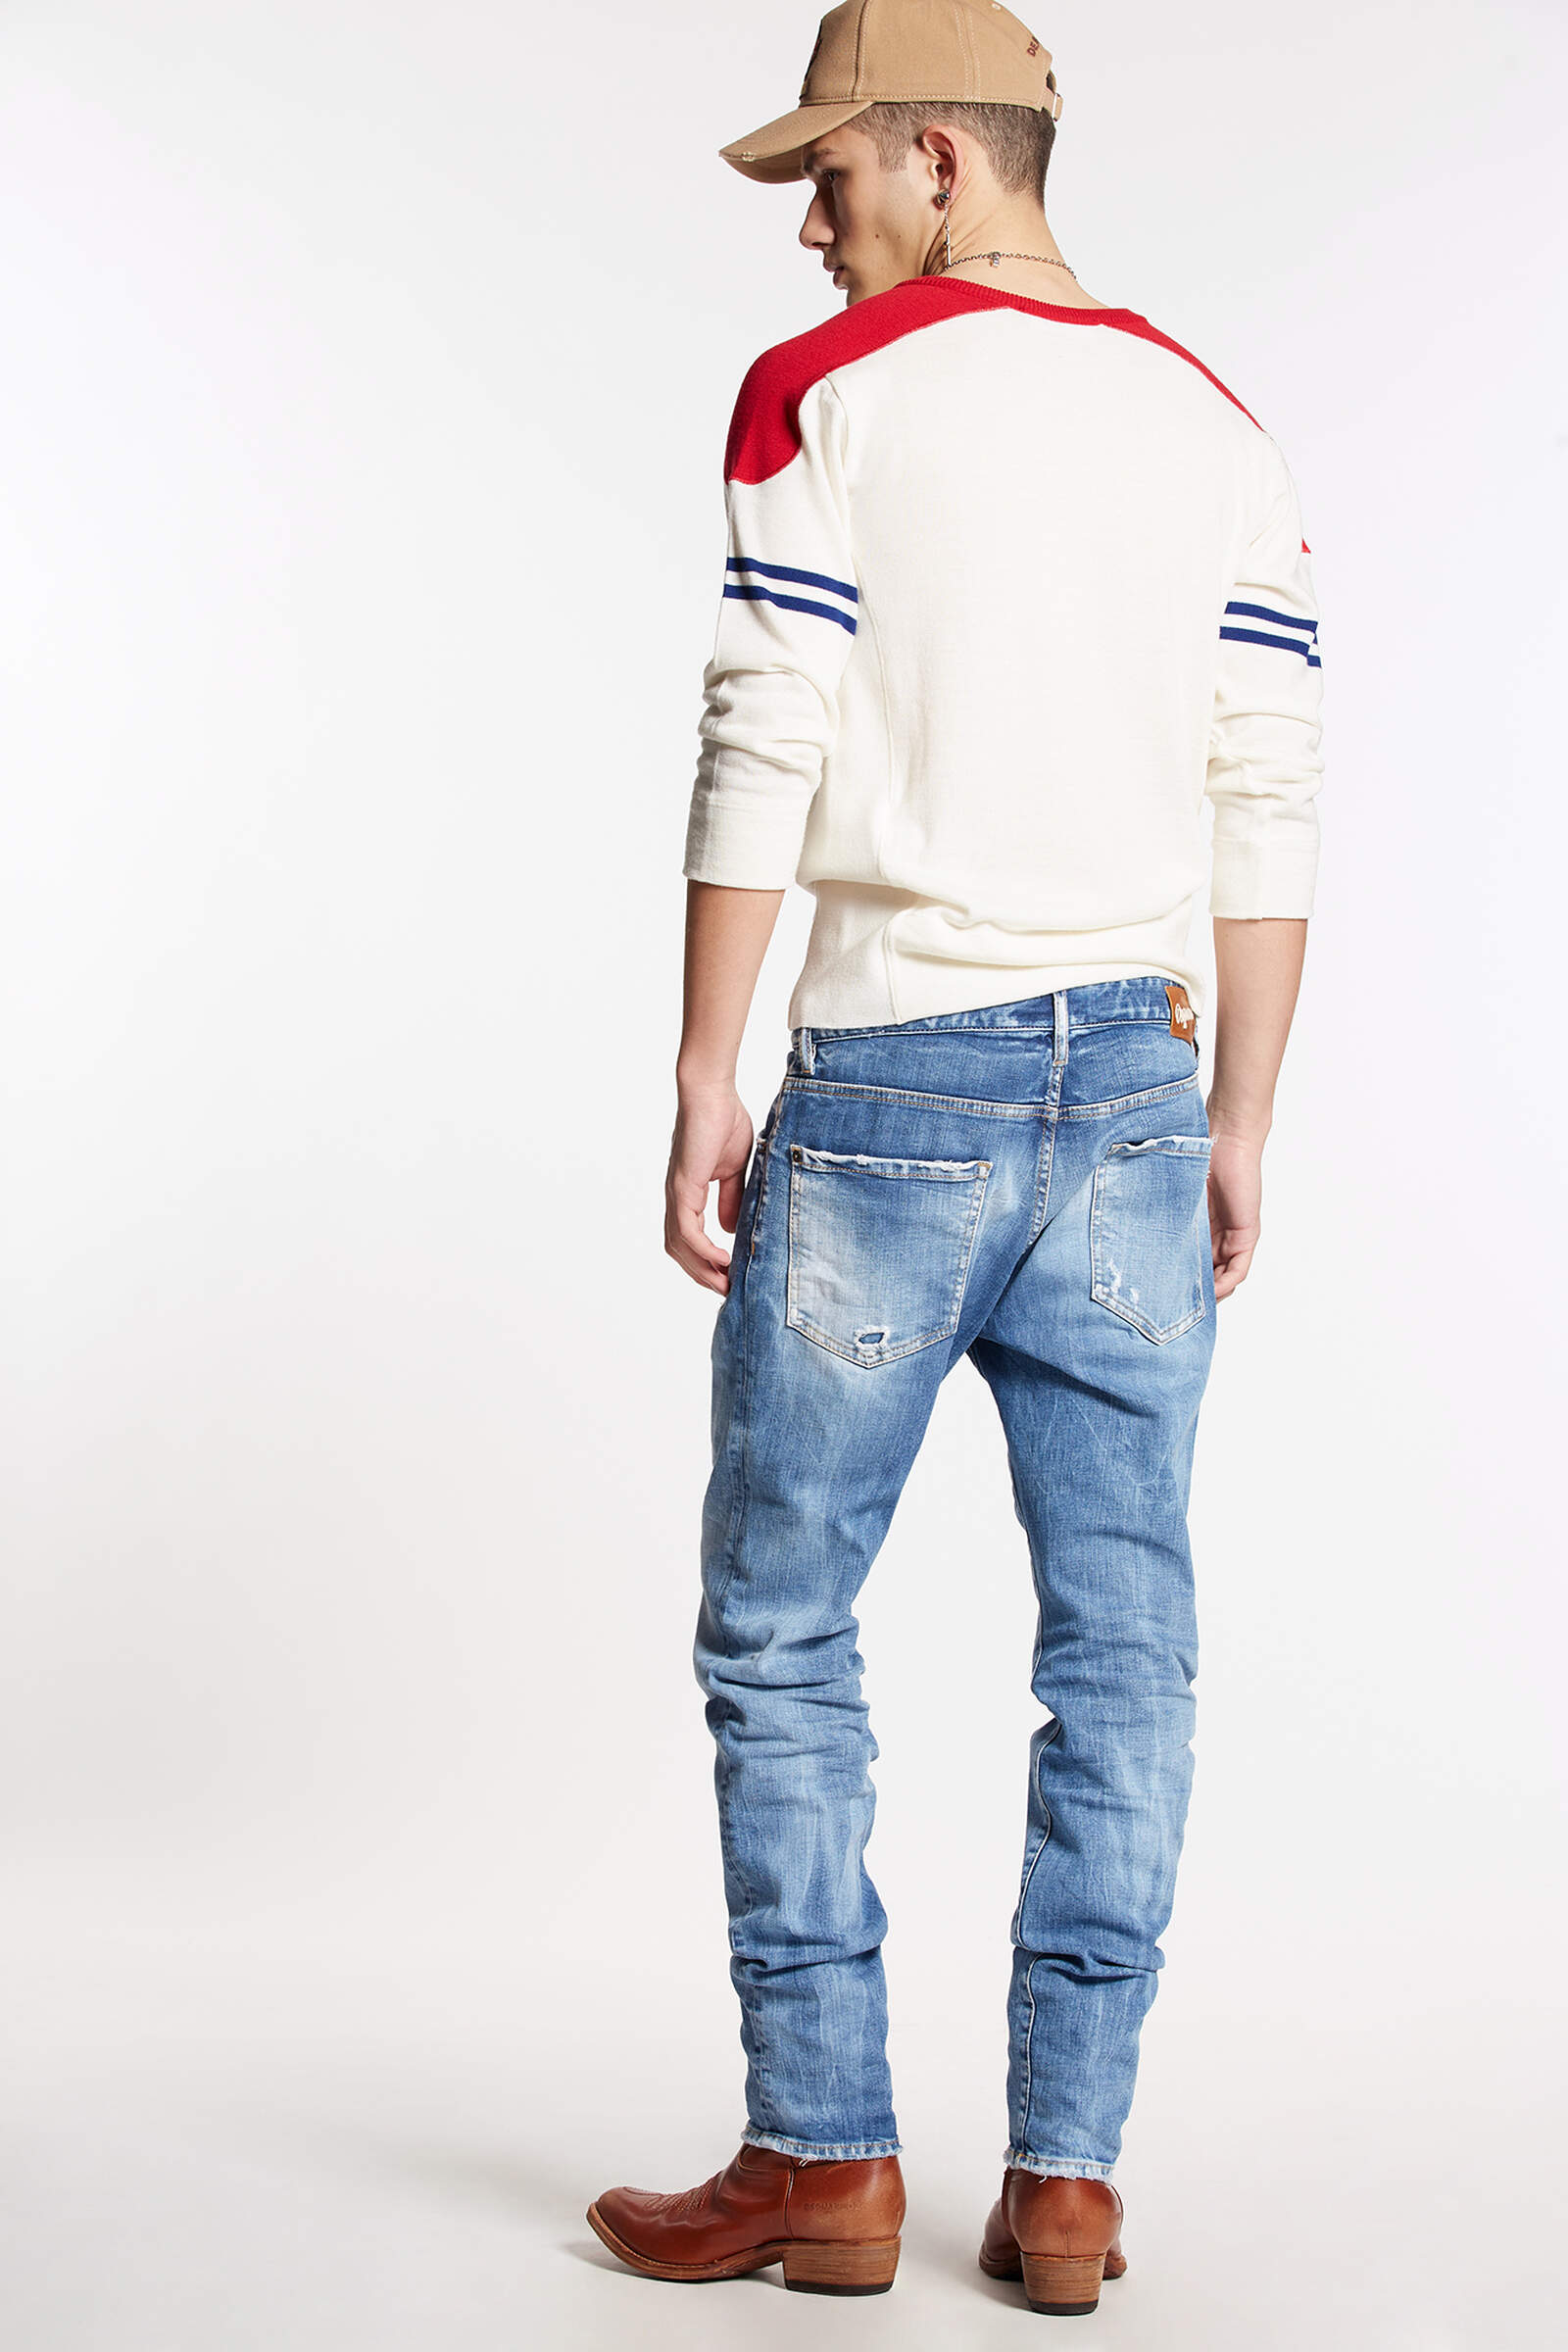 DSQUARED2 Cool Guy Jeans in Light Blue Washing 46